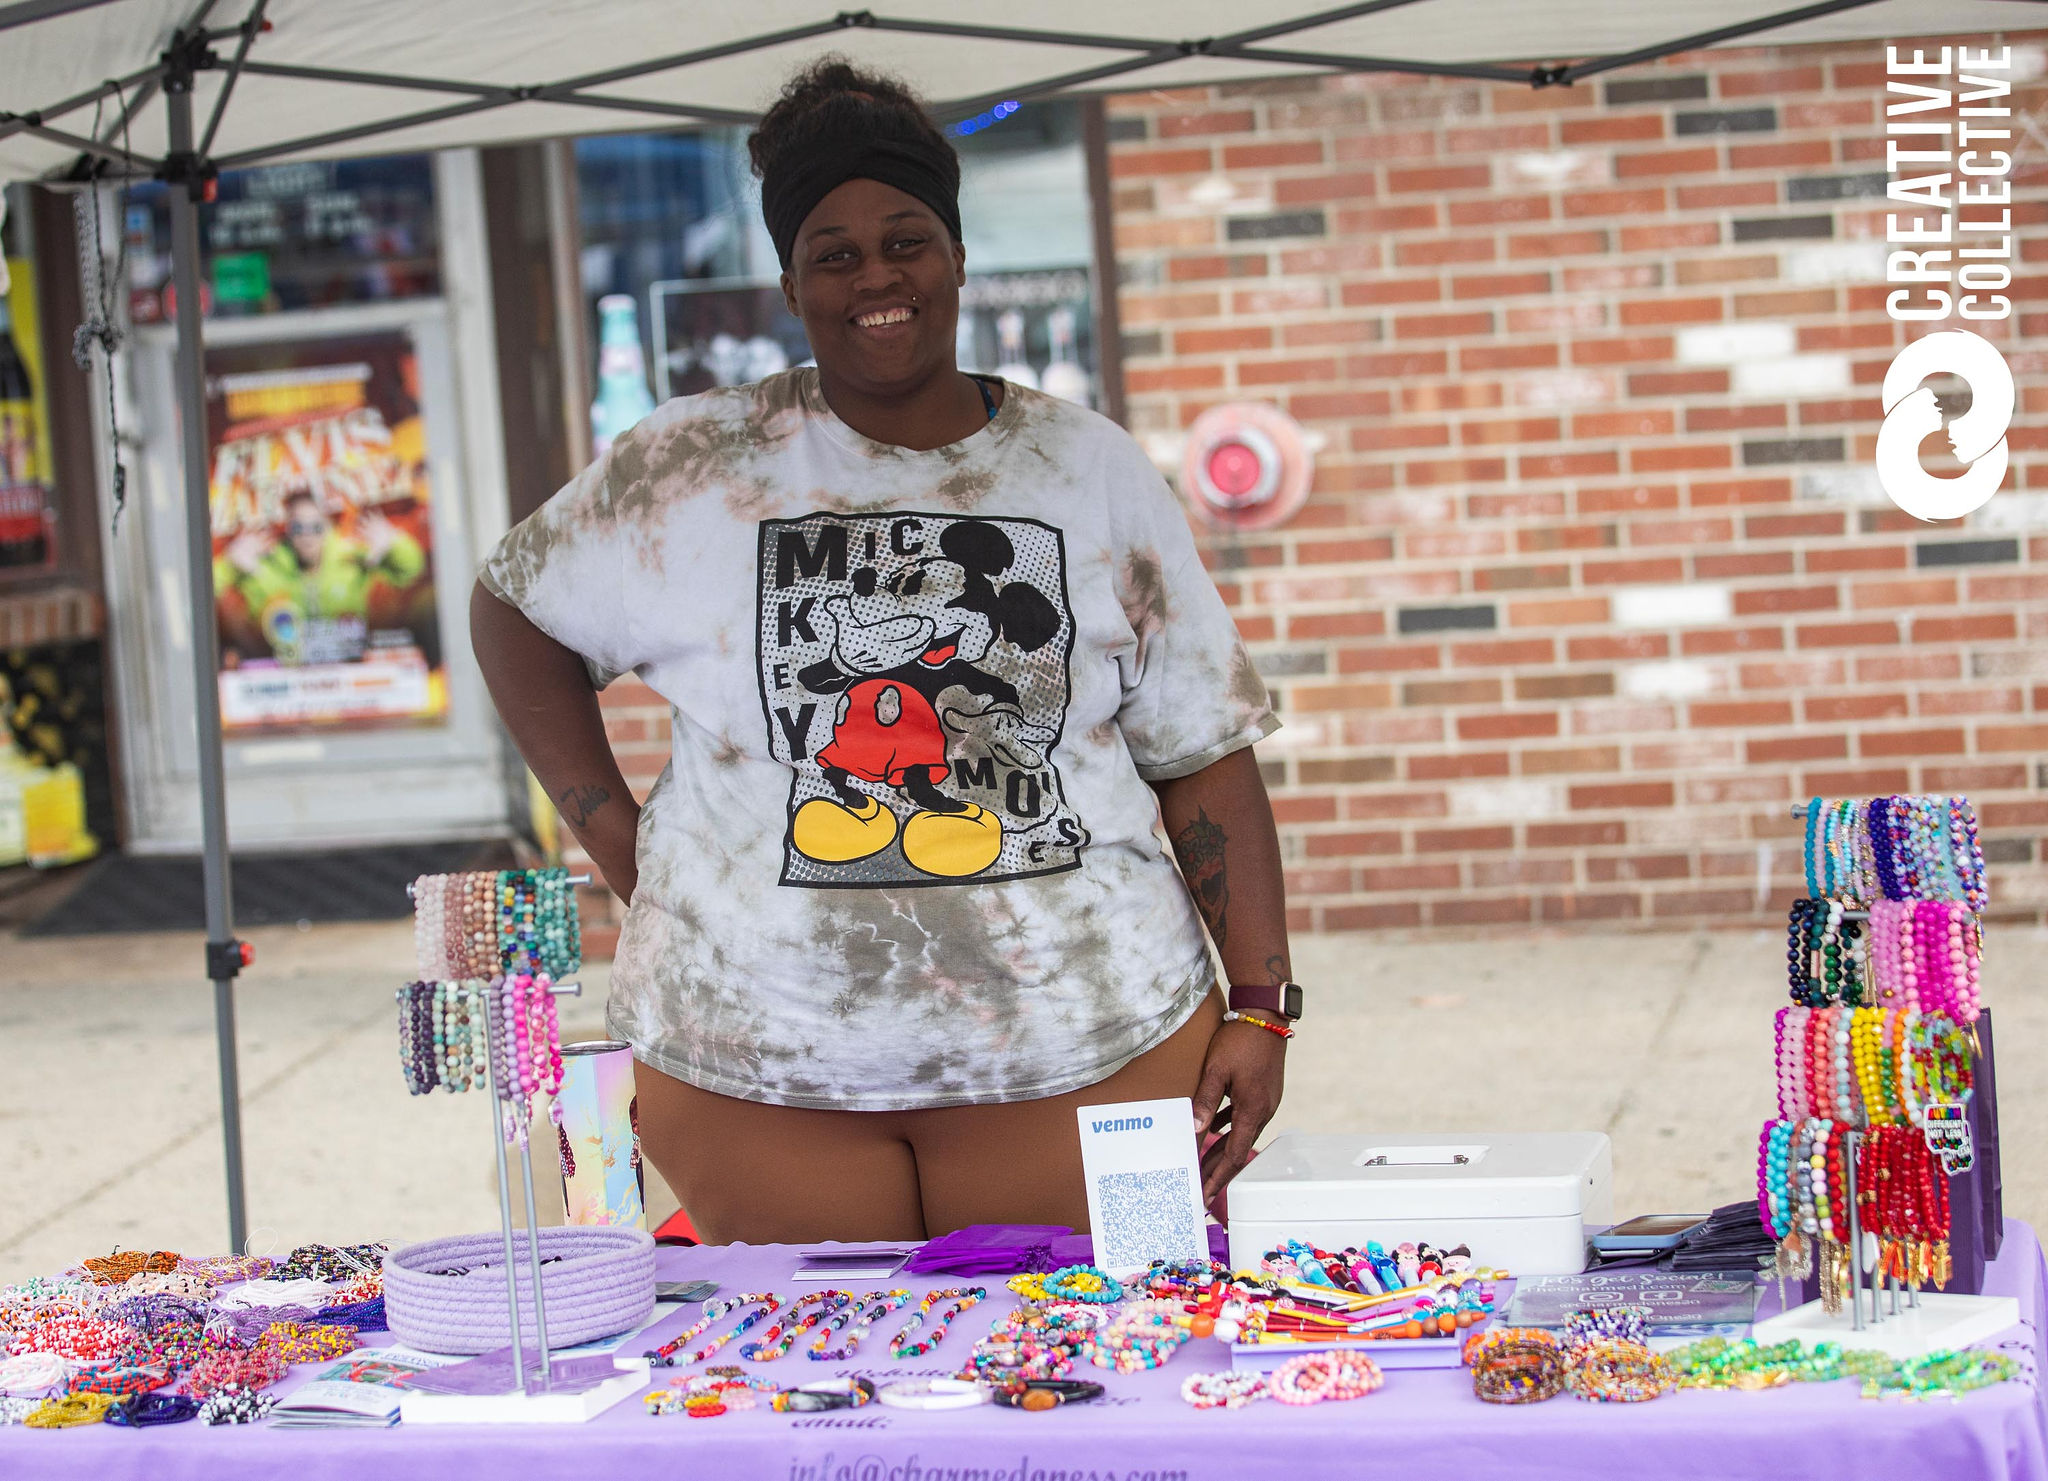 A curvy black person with short cropped hair in a mickey mouse t-shirt smiles behind her booth at the Peabody International Festival